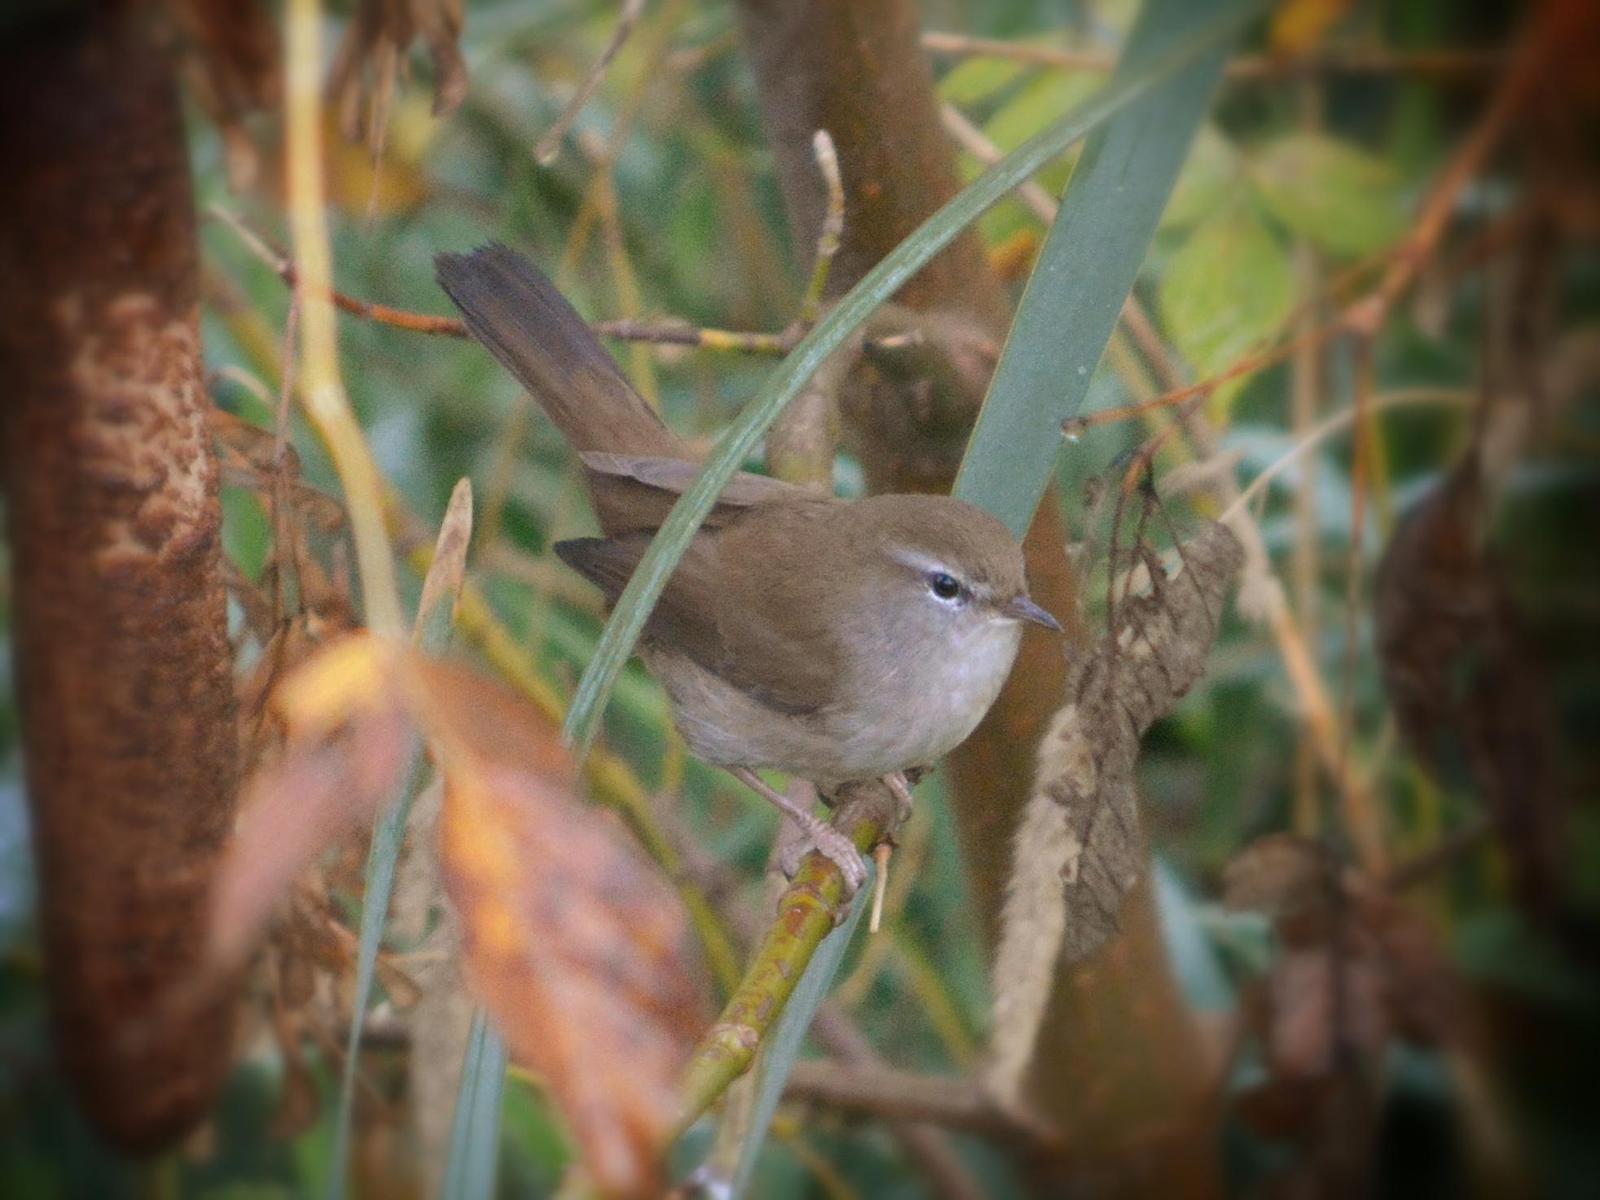 Cetti's Warbler Photo by Tino Fernandez